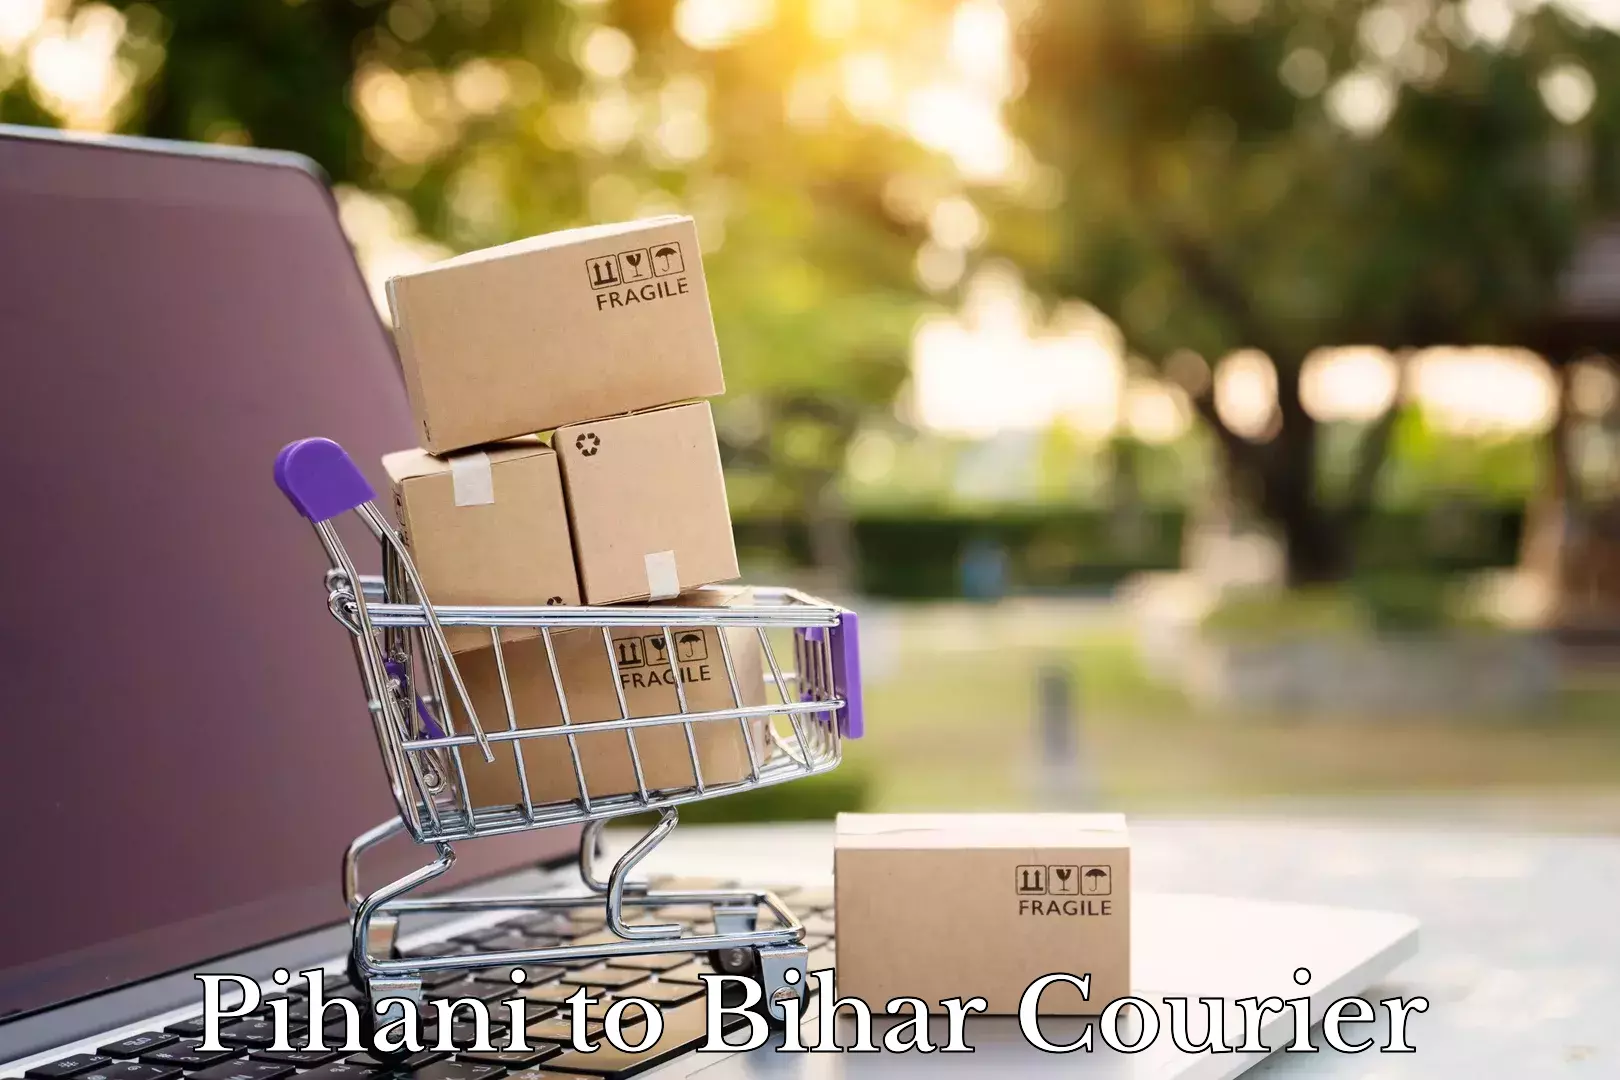 Local delivery service Pihani to Bihar